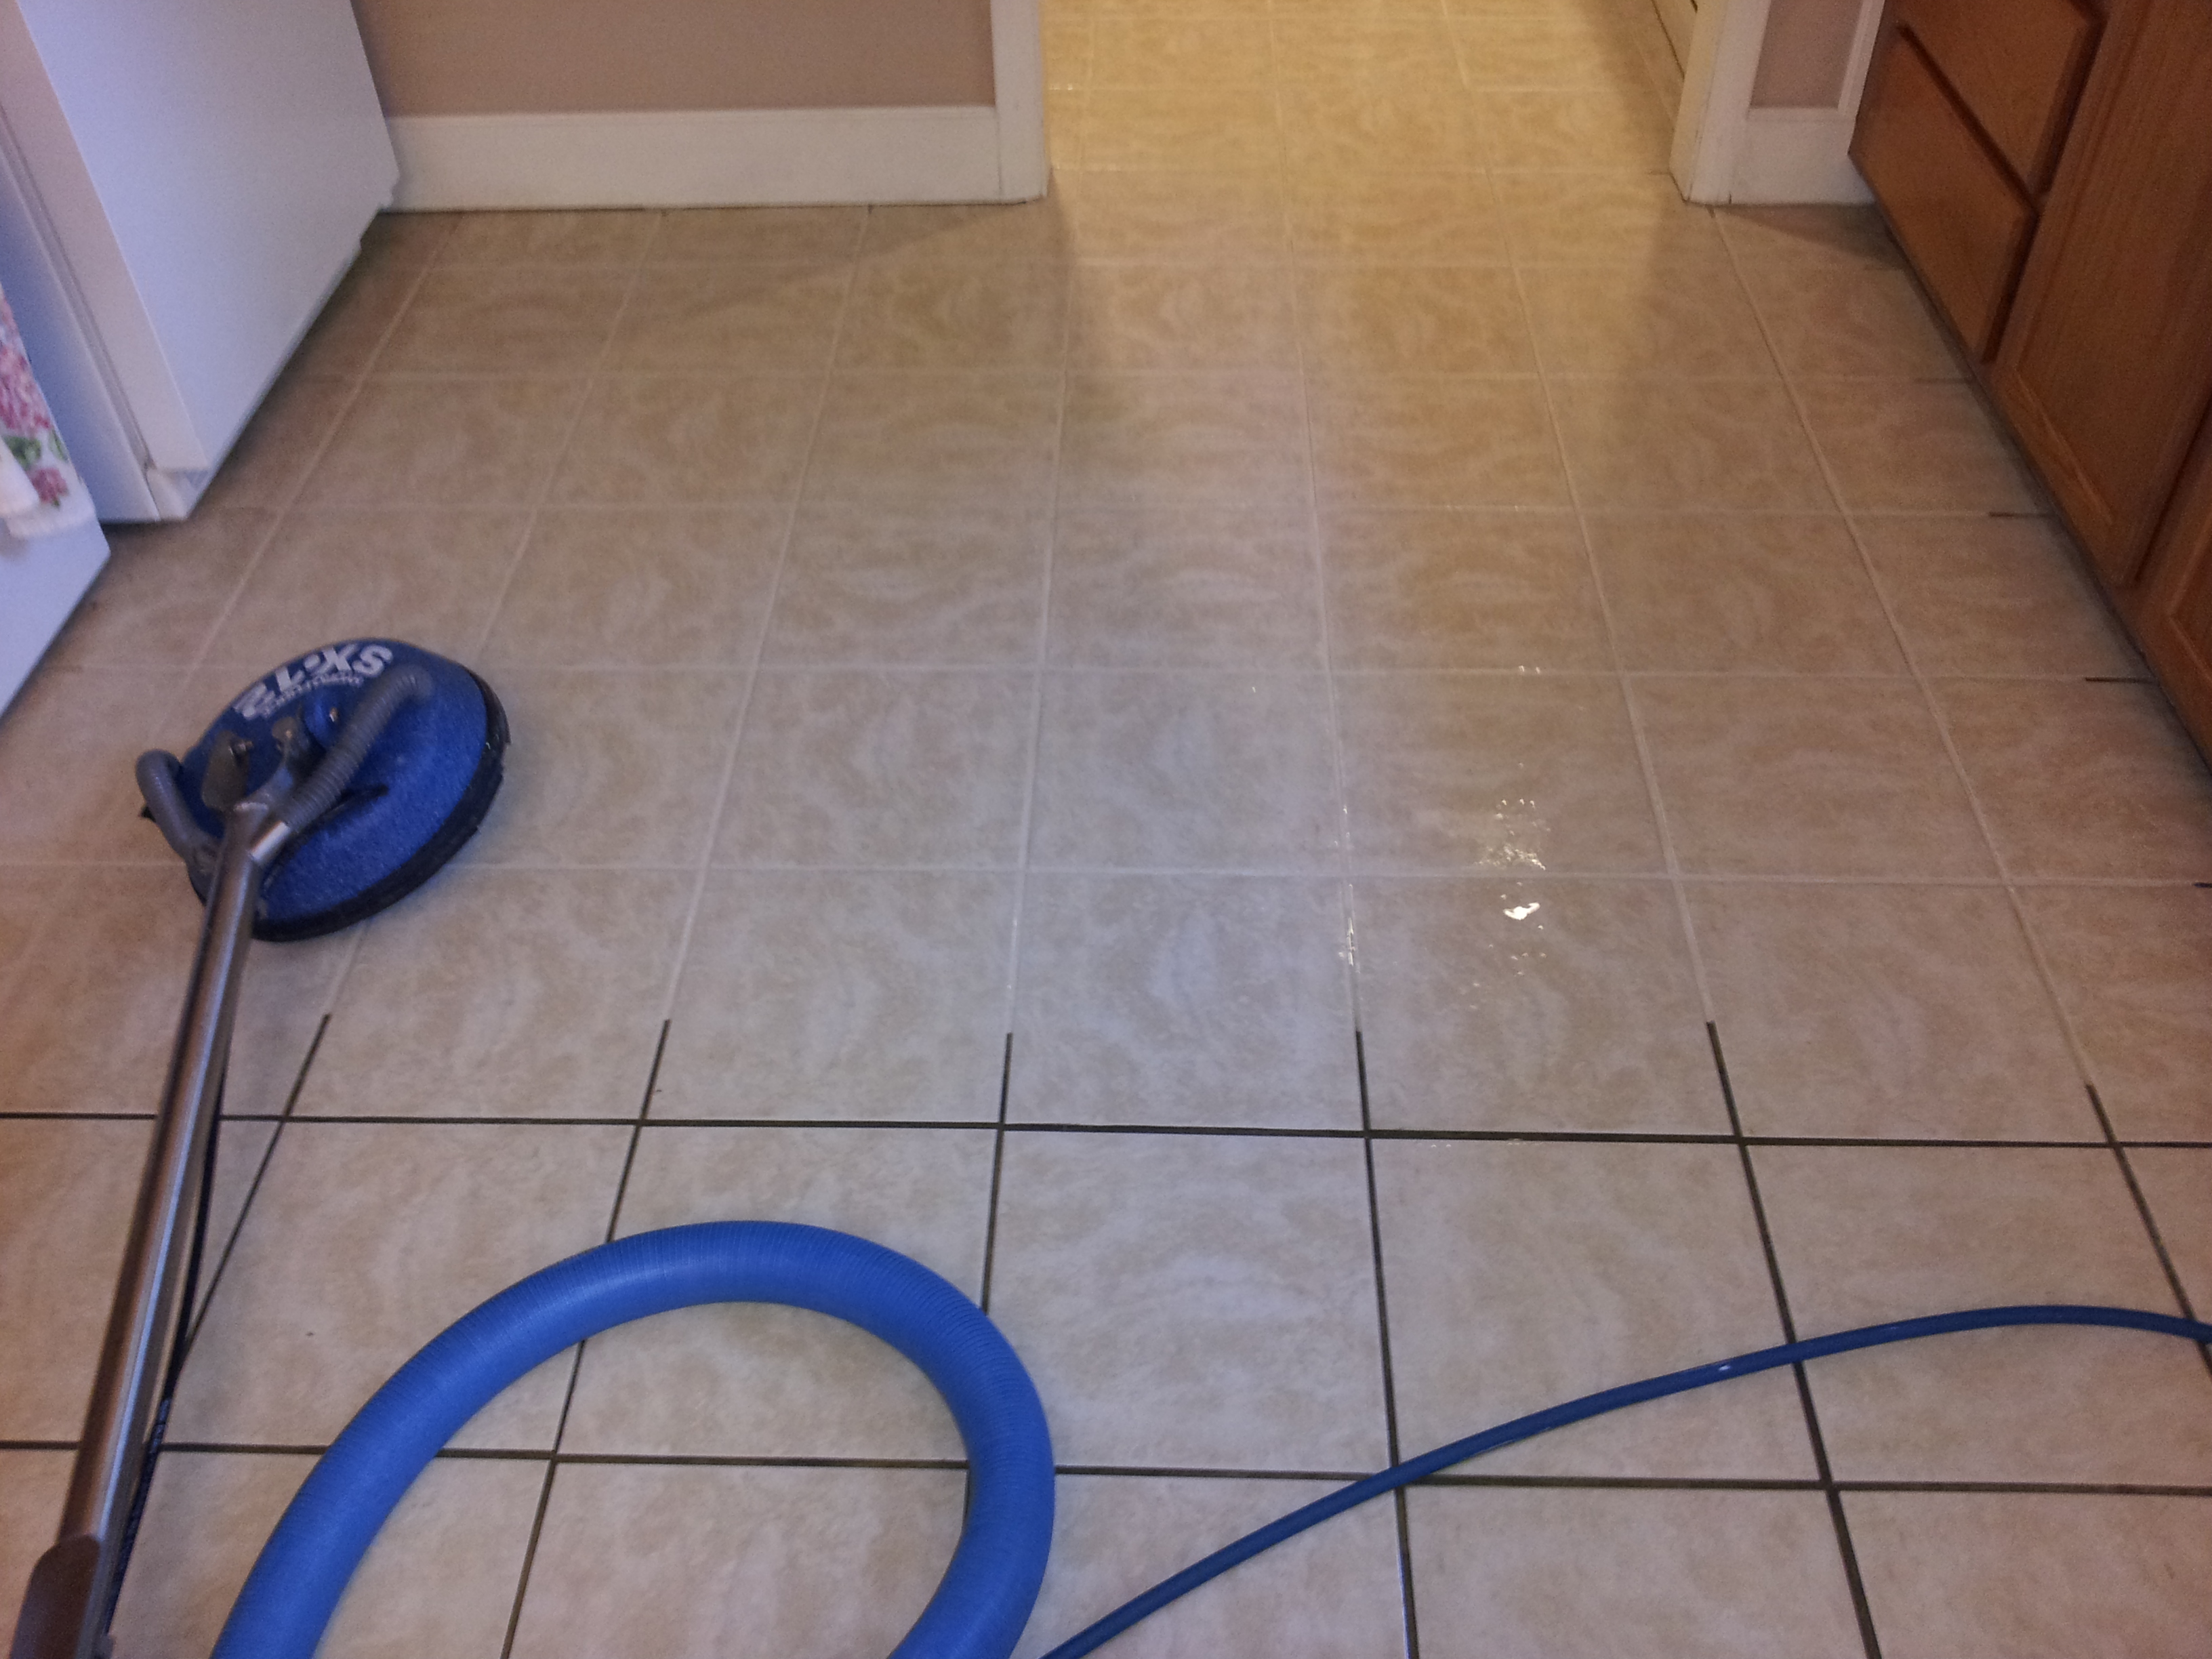 Ultimate Tile Grout Cleaning S, How To Clean Bathroom Floor Tile Grout